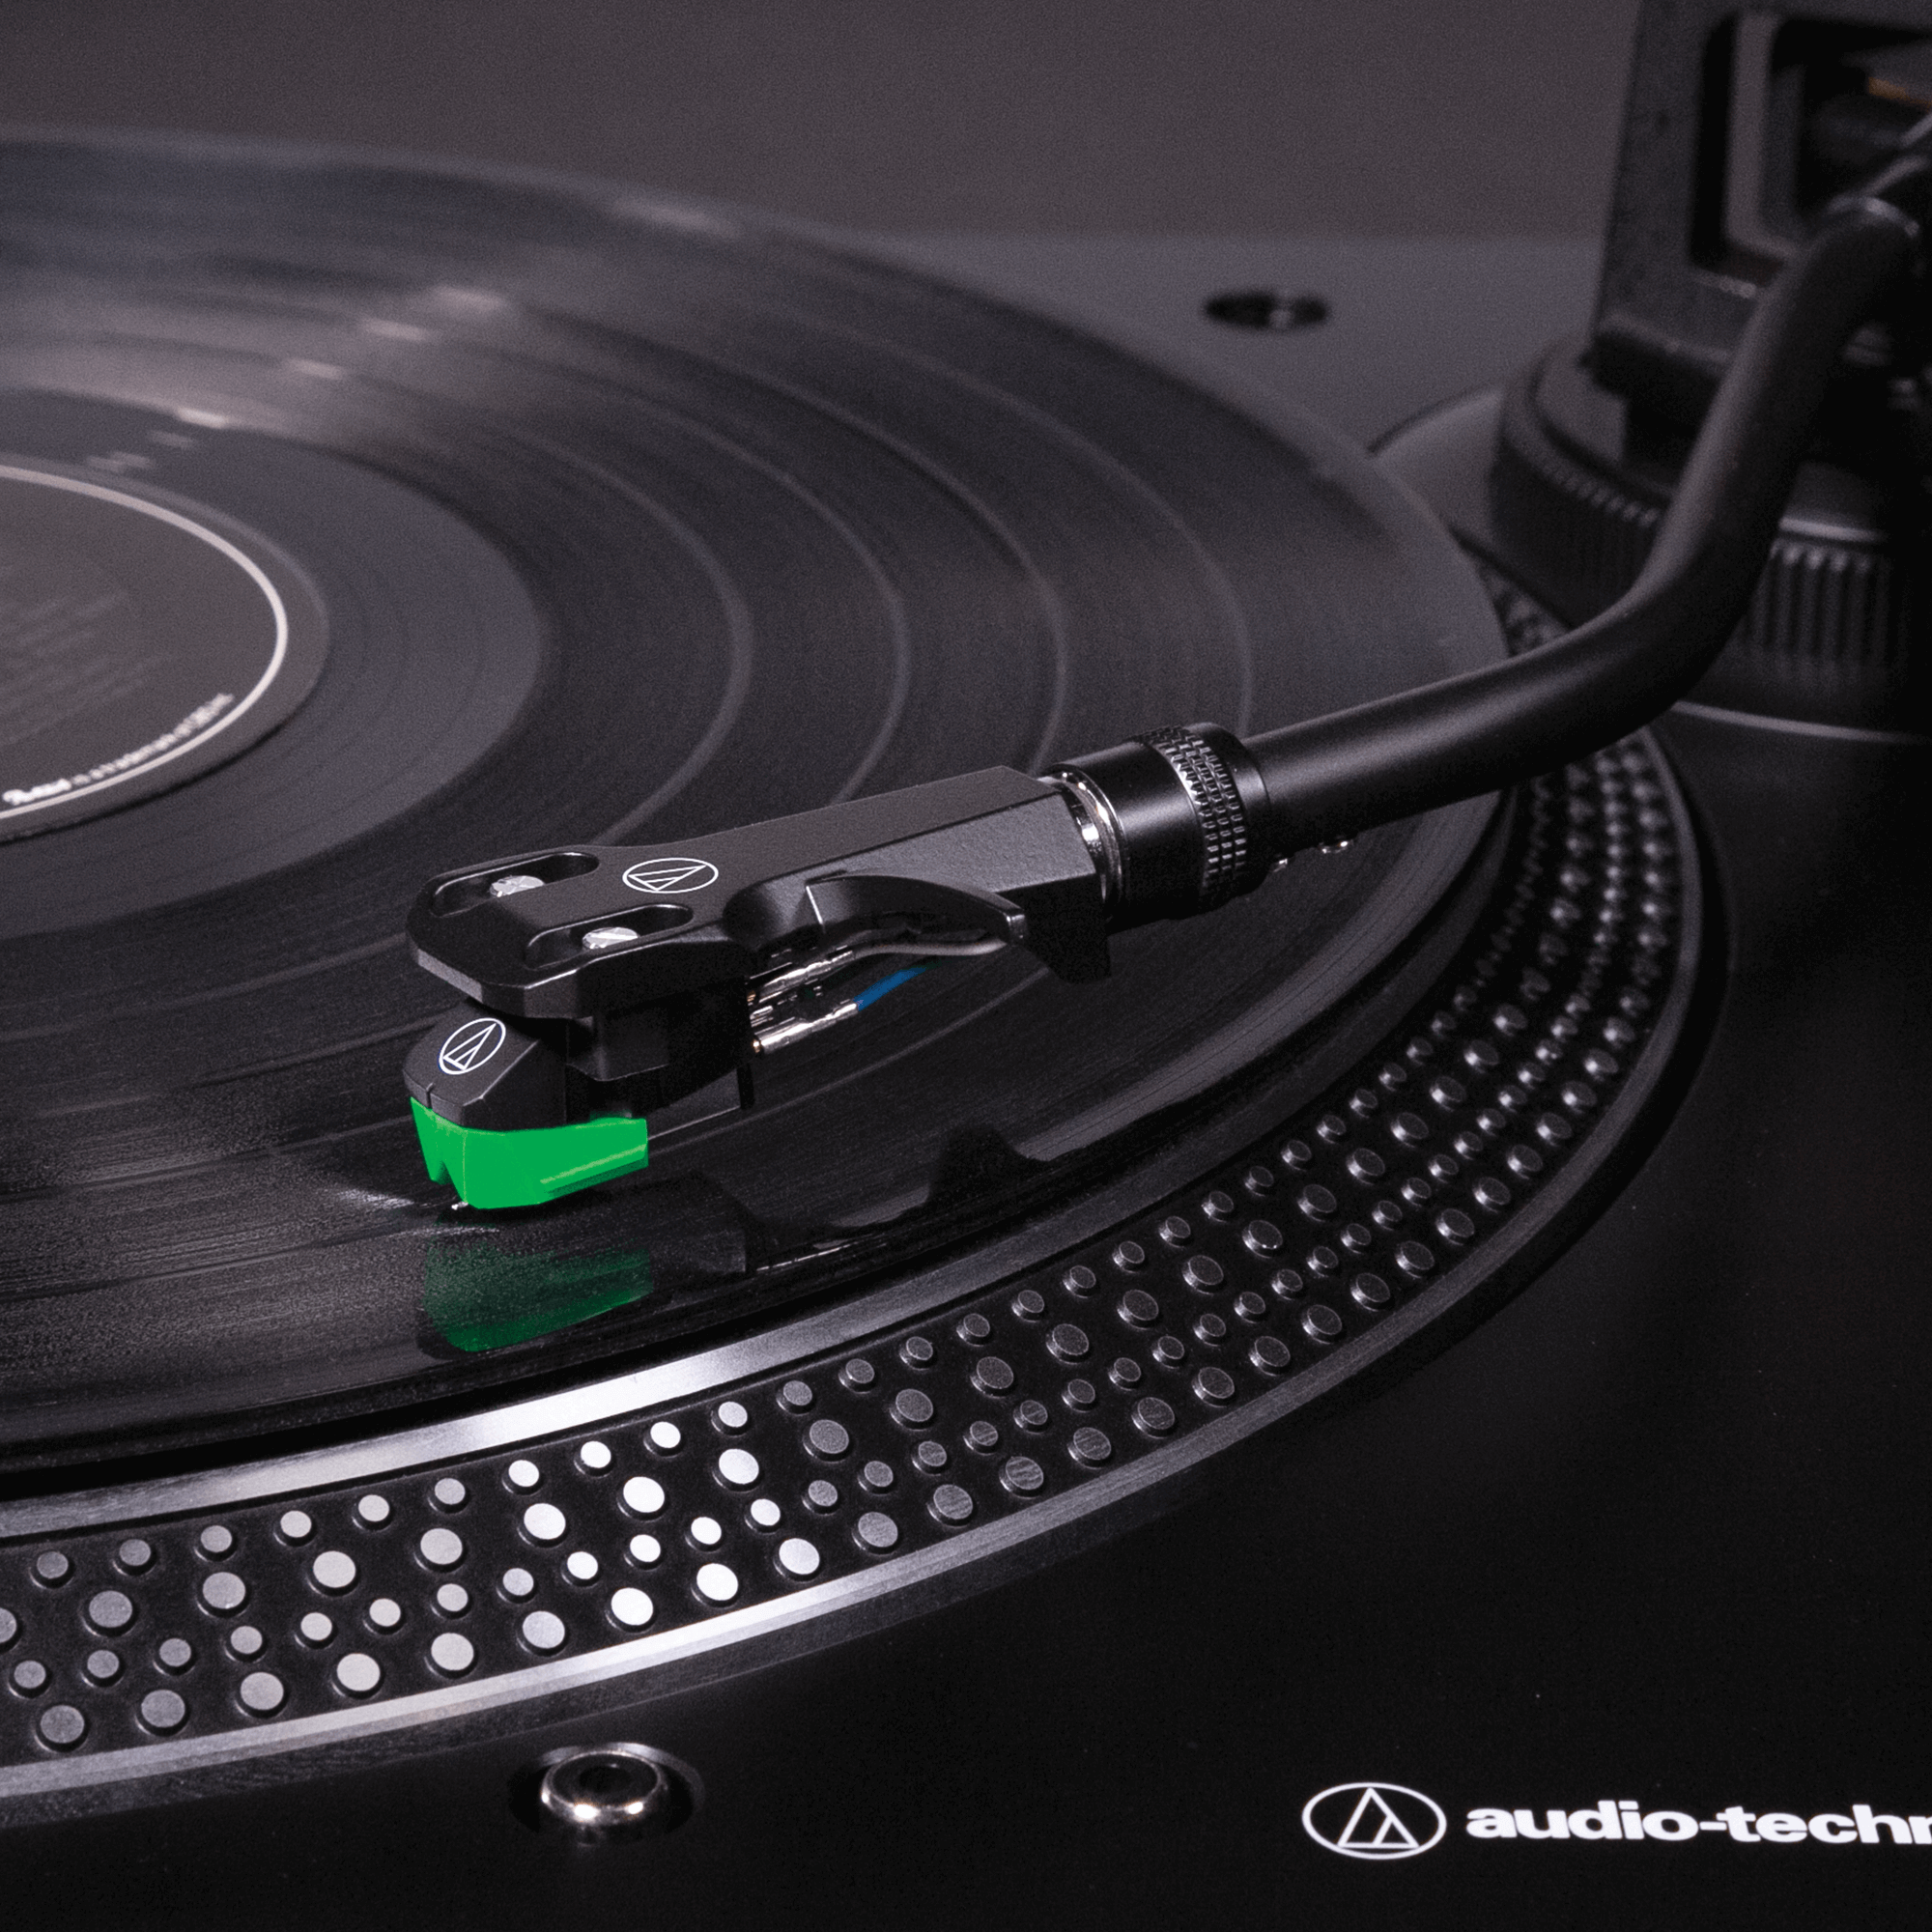 Audio-Technica Debuts AT-LP120XBT-USB Direct-Drive Manual Turntable